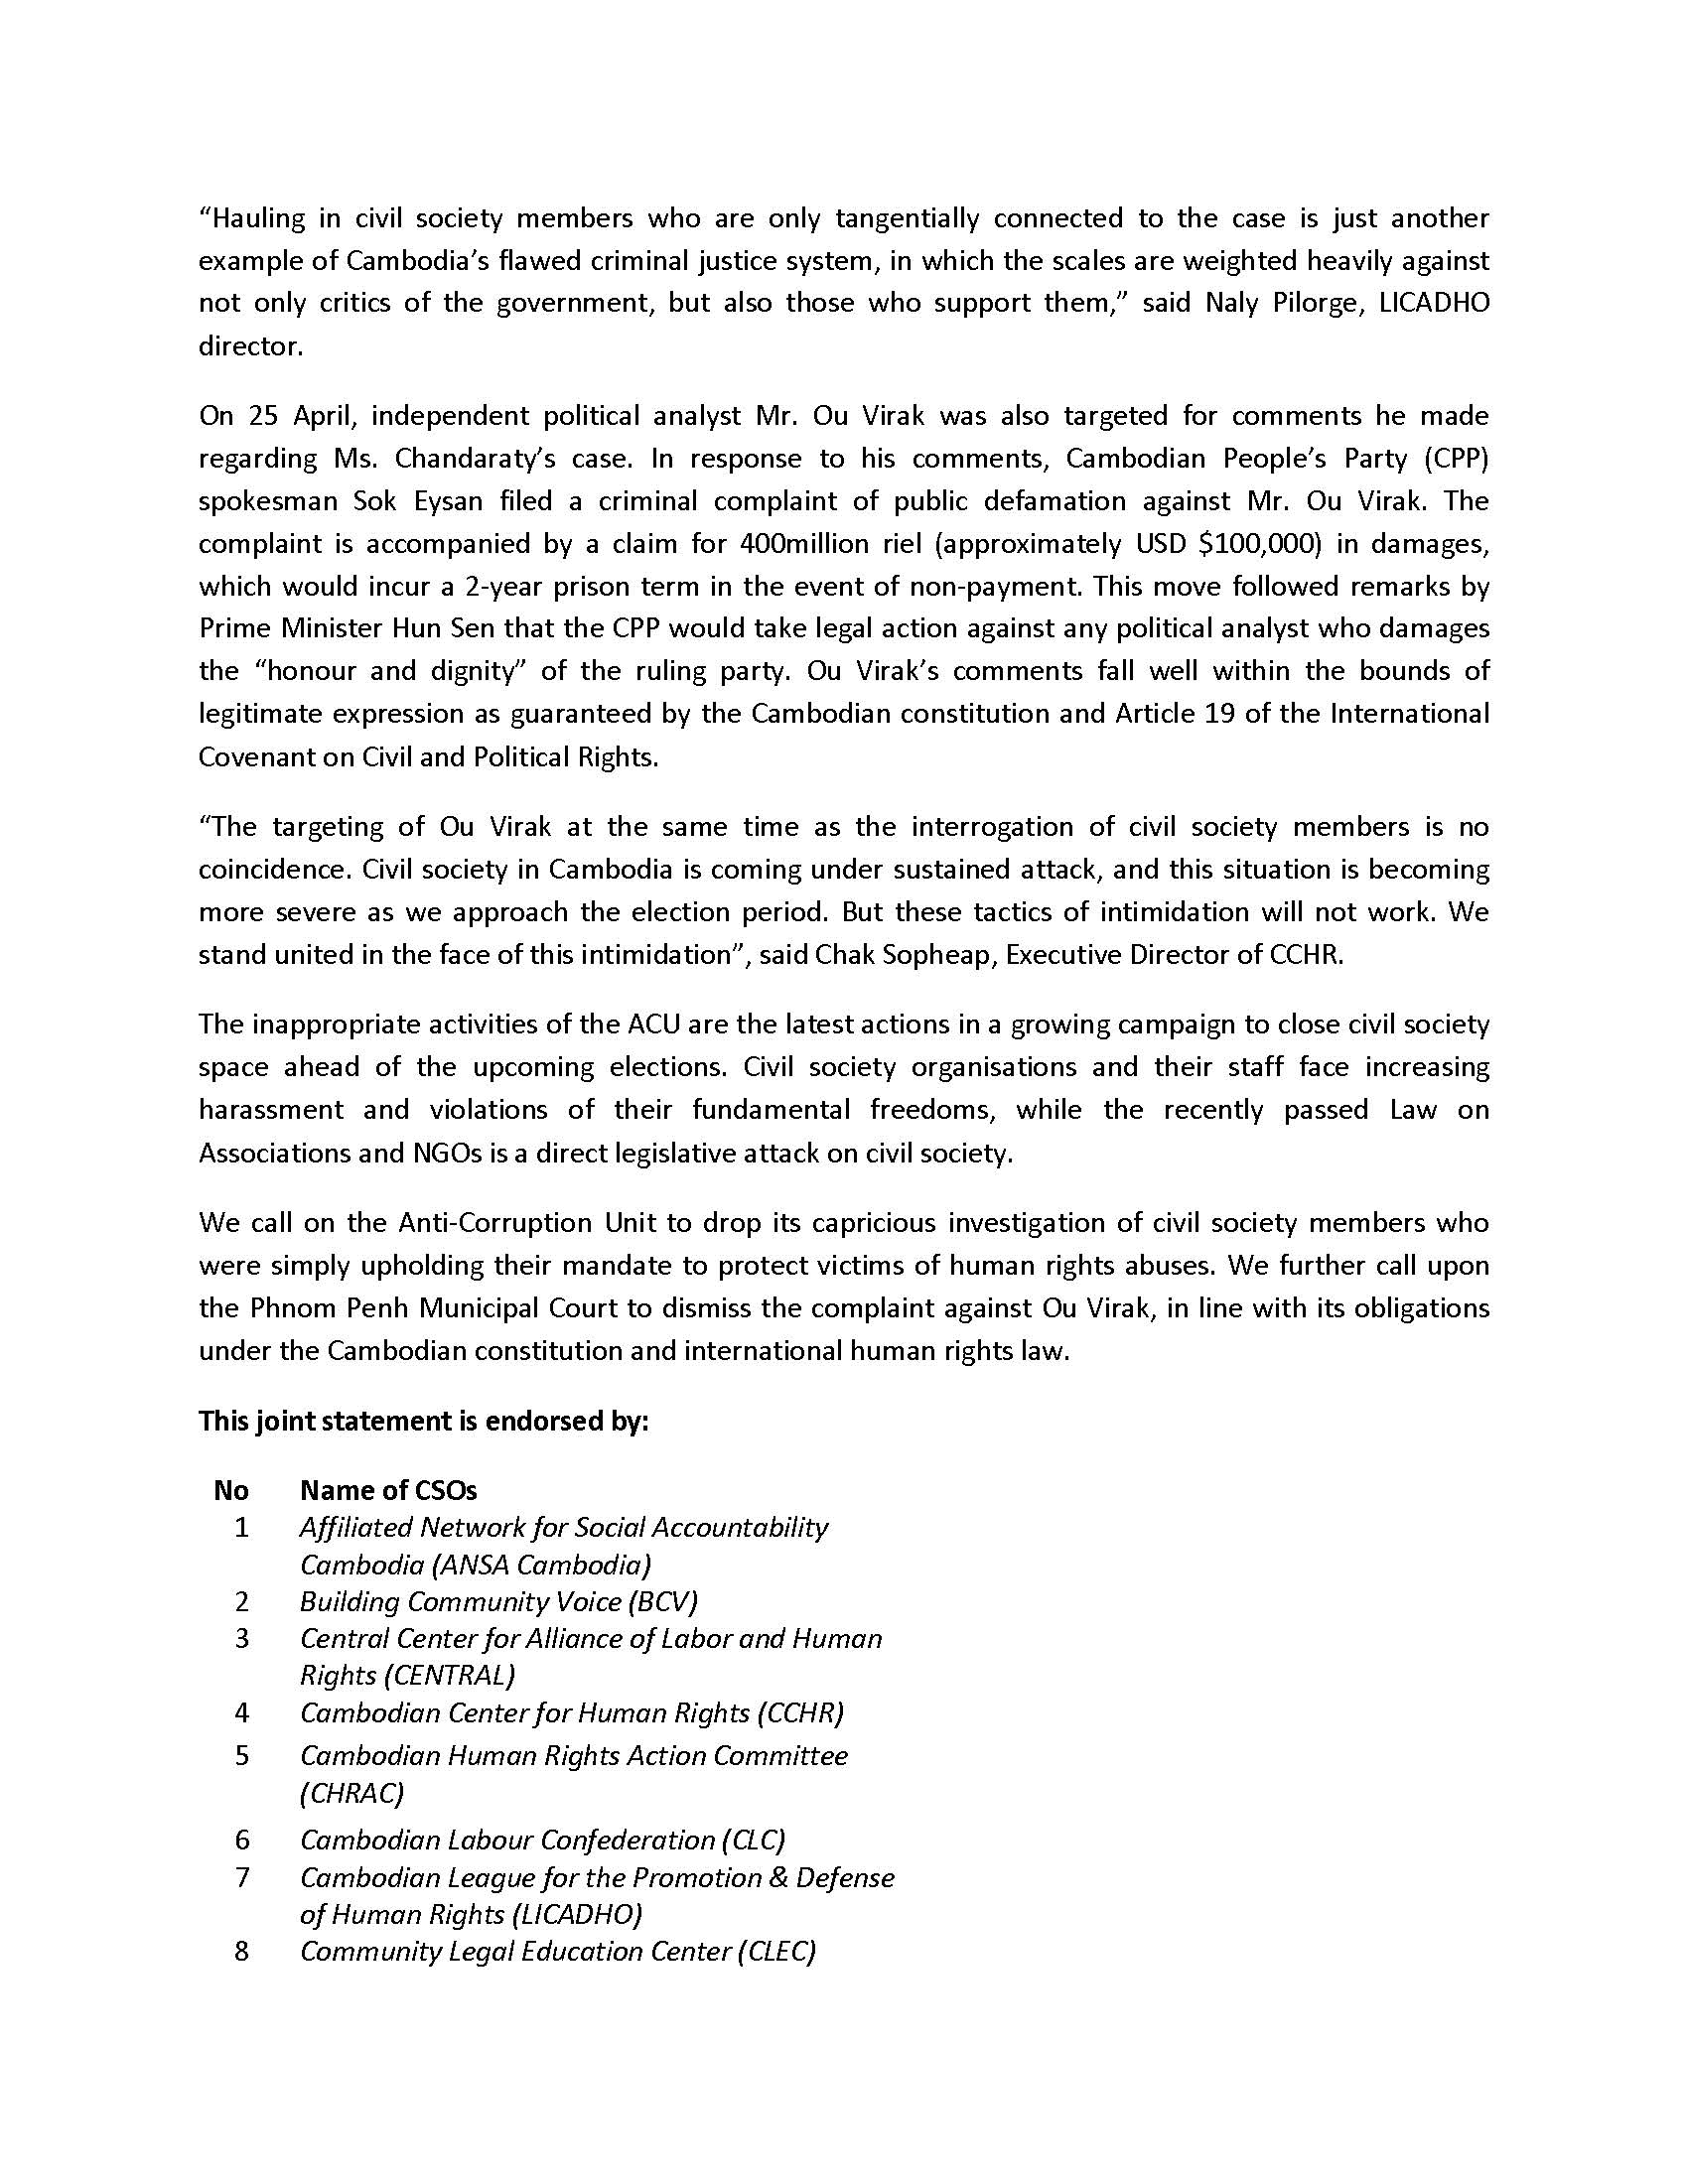 402Joint Press Release - CSOs call upon the authorities to immediately cease harrassment of human rights defenders _(ENG)-2_Page_2